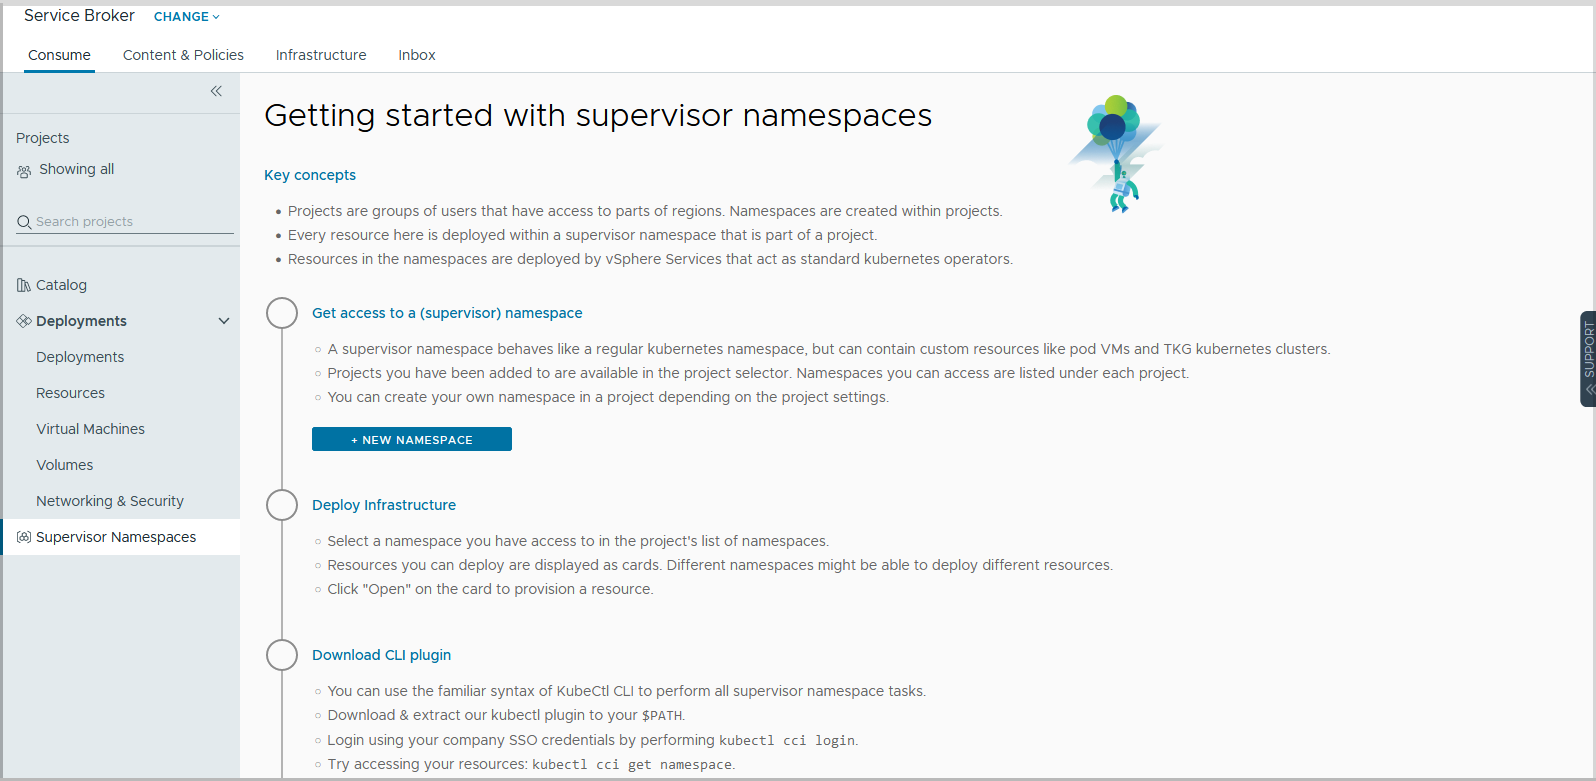 Click new namespaces to add a Supervisor namespace.